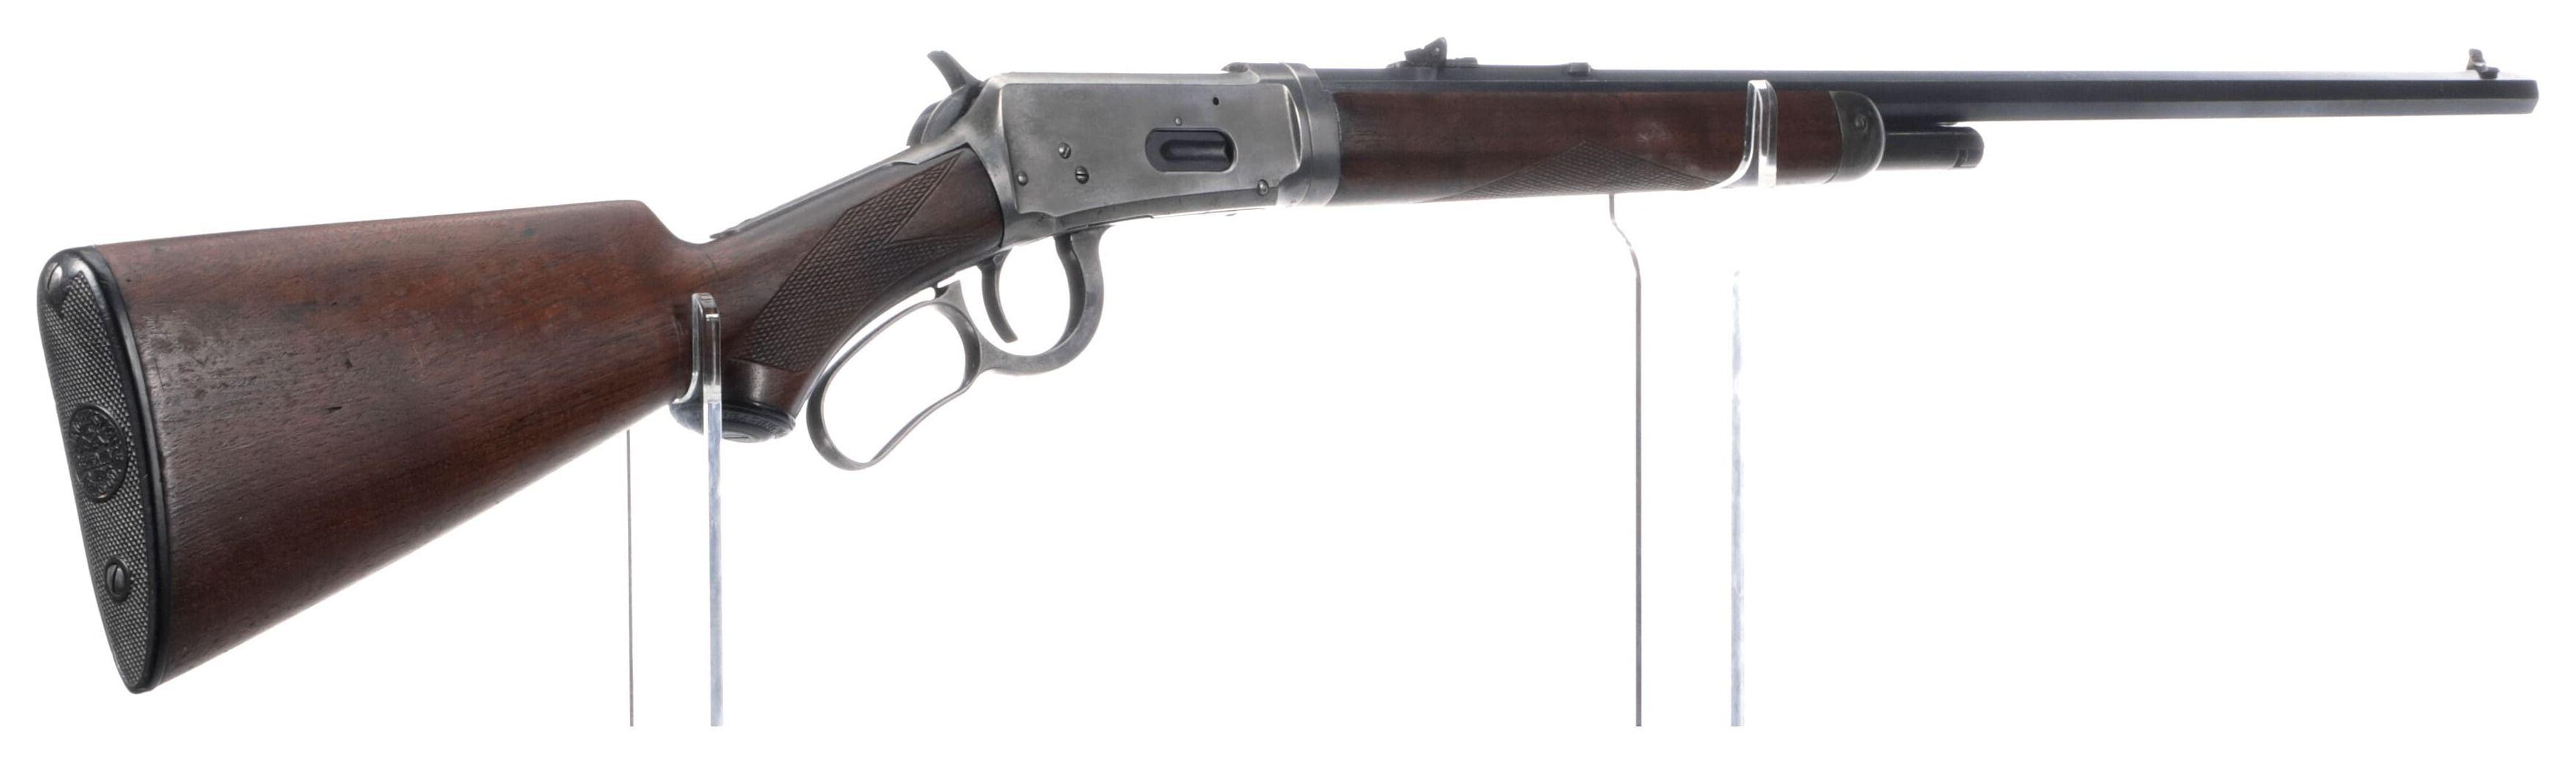 Winchester Semi-Deluxe Style Model 1894 Takedown Rifle